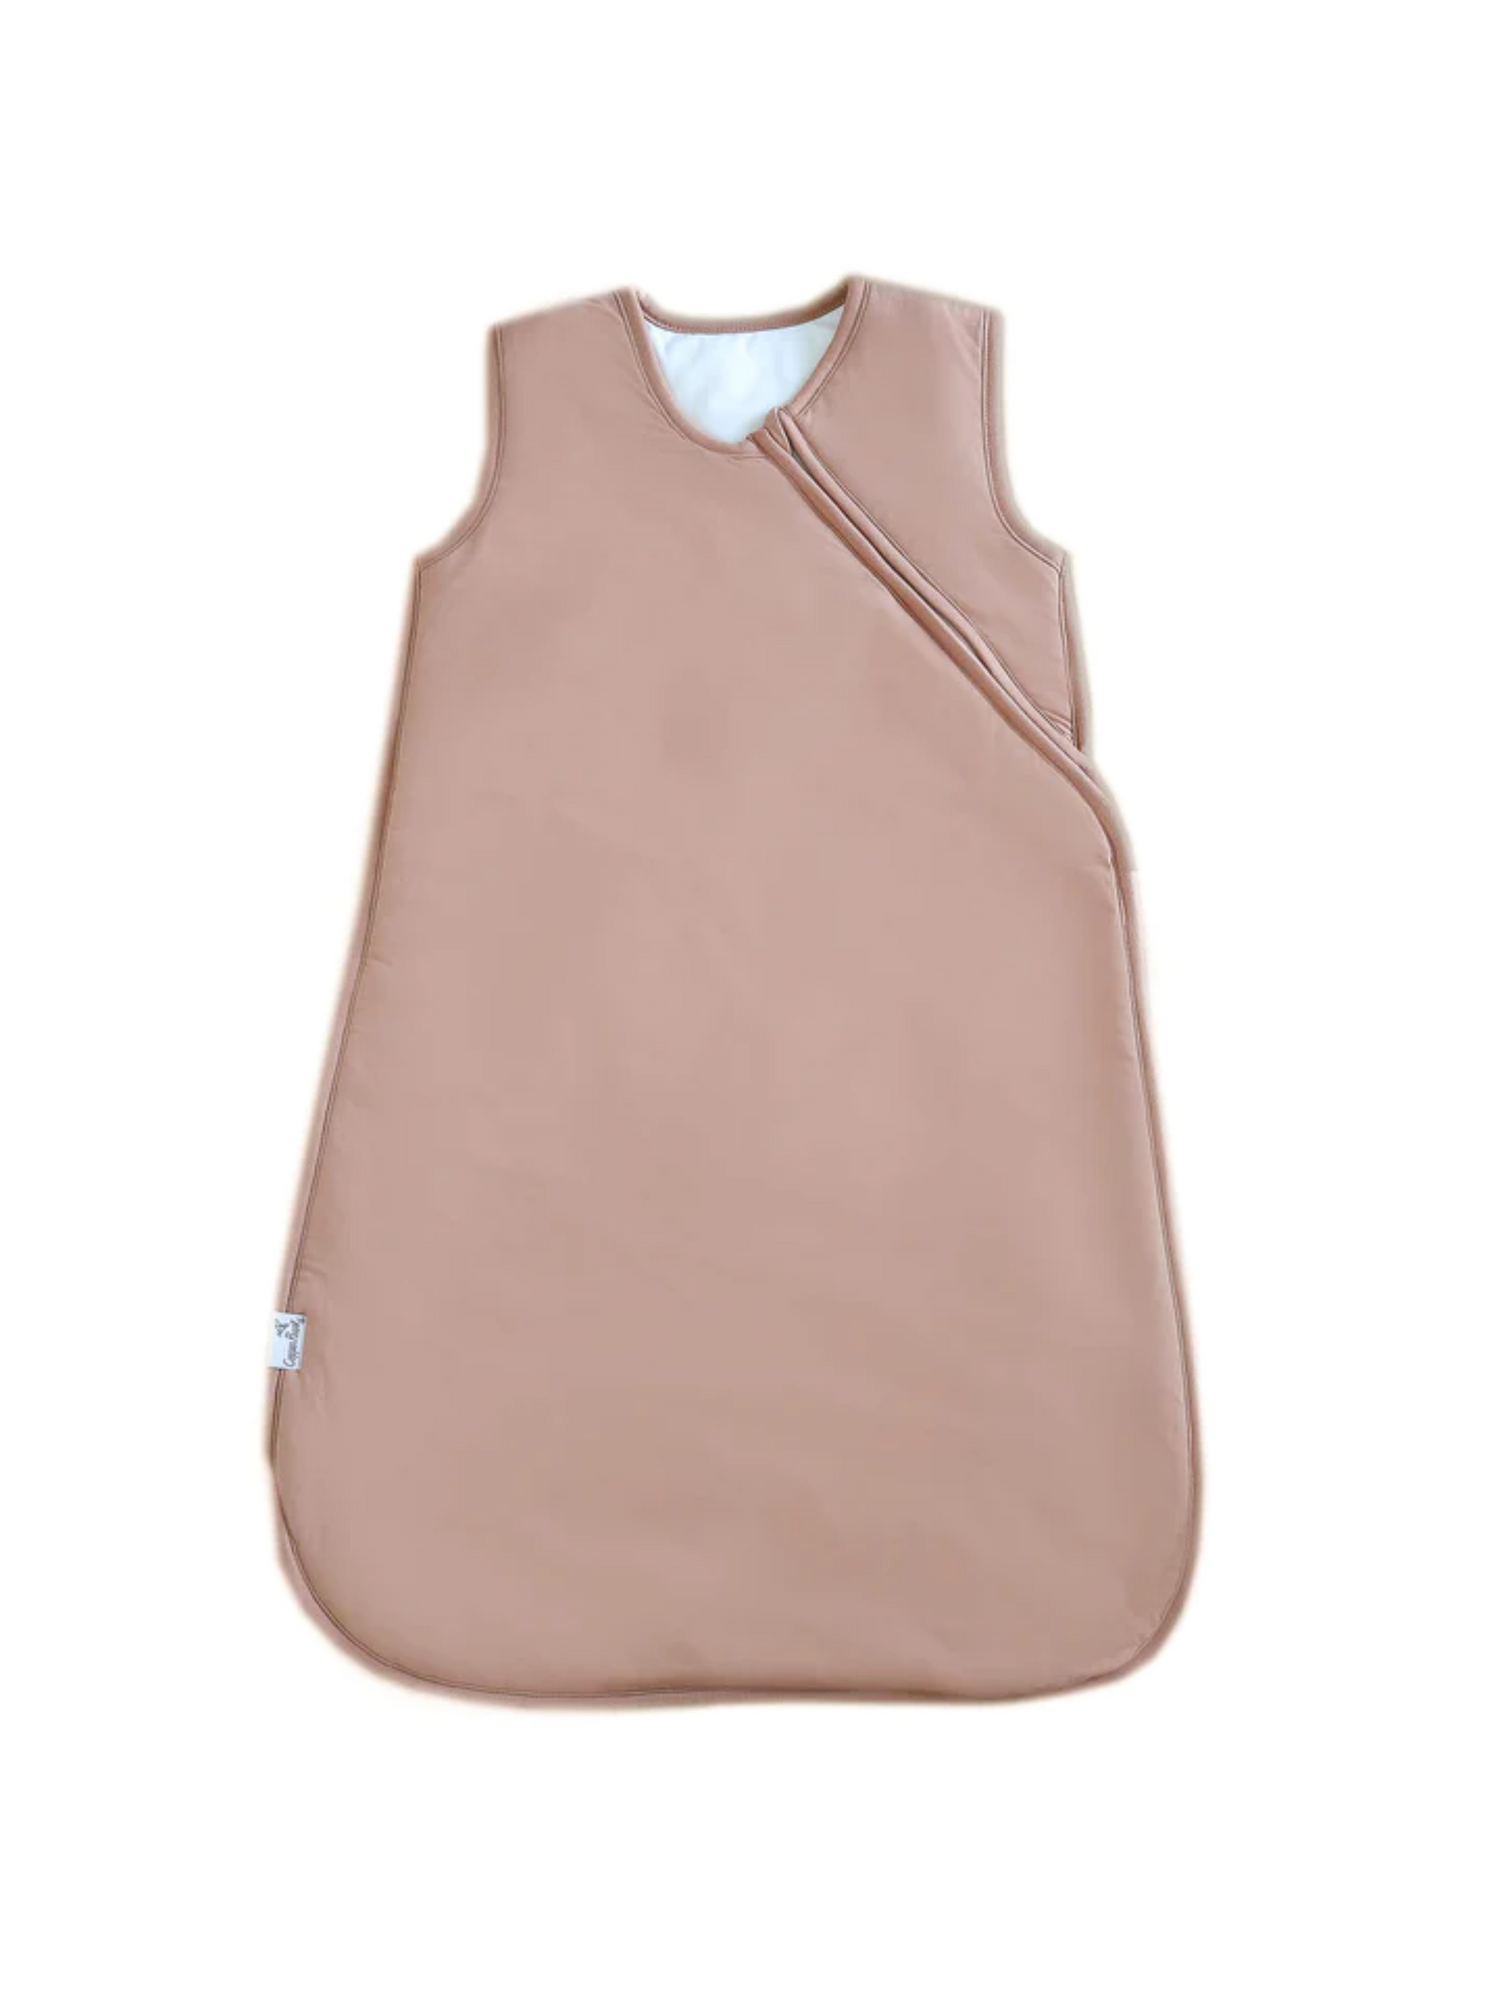 COPPER PEARL CLOUD SLEEP BAG IN PECAN - THE LITTLE EAGLE BOUTIQUE